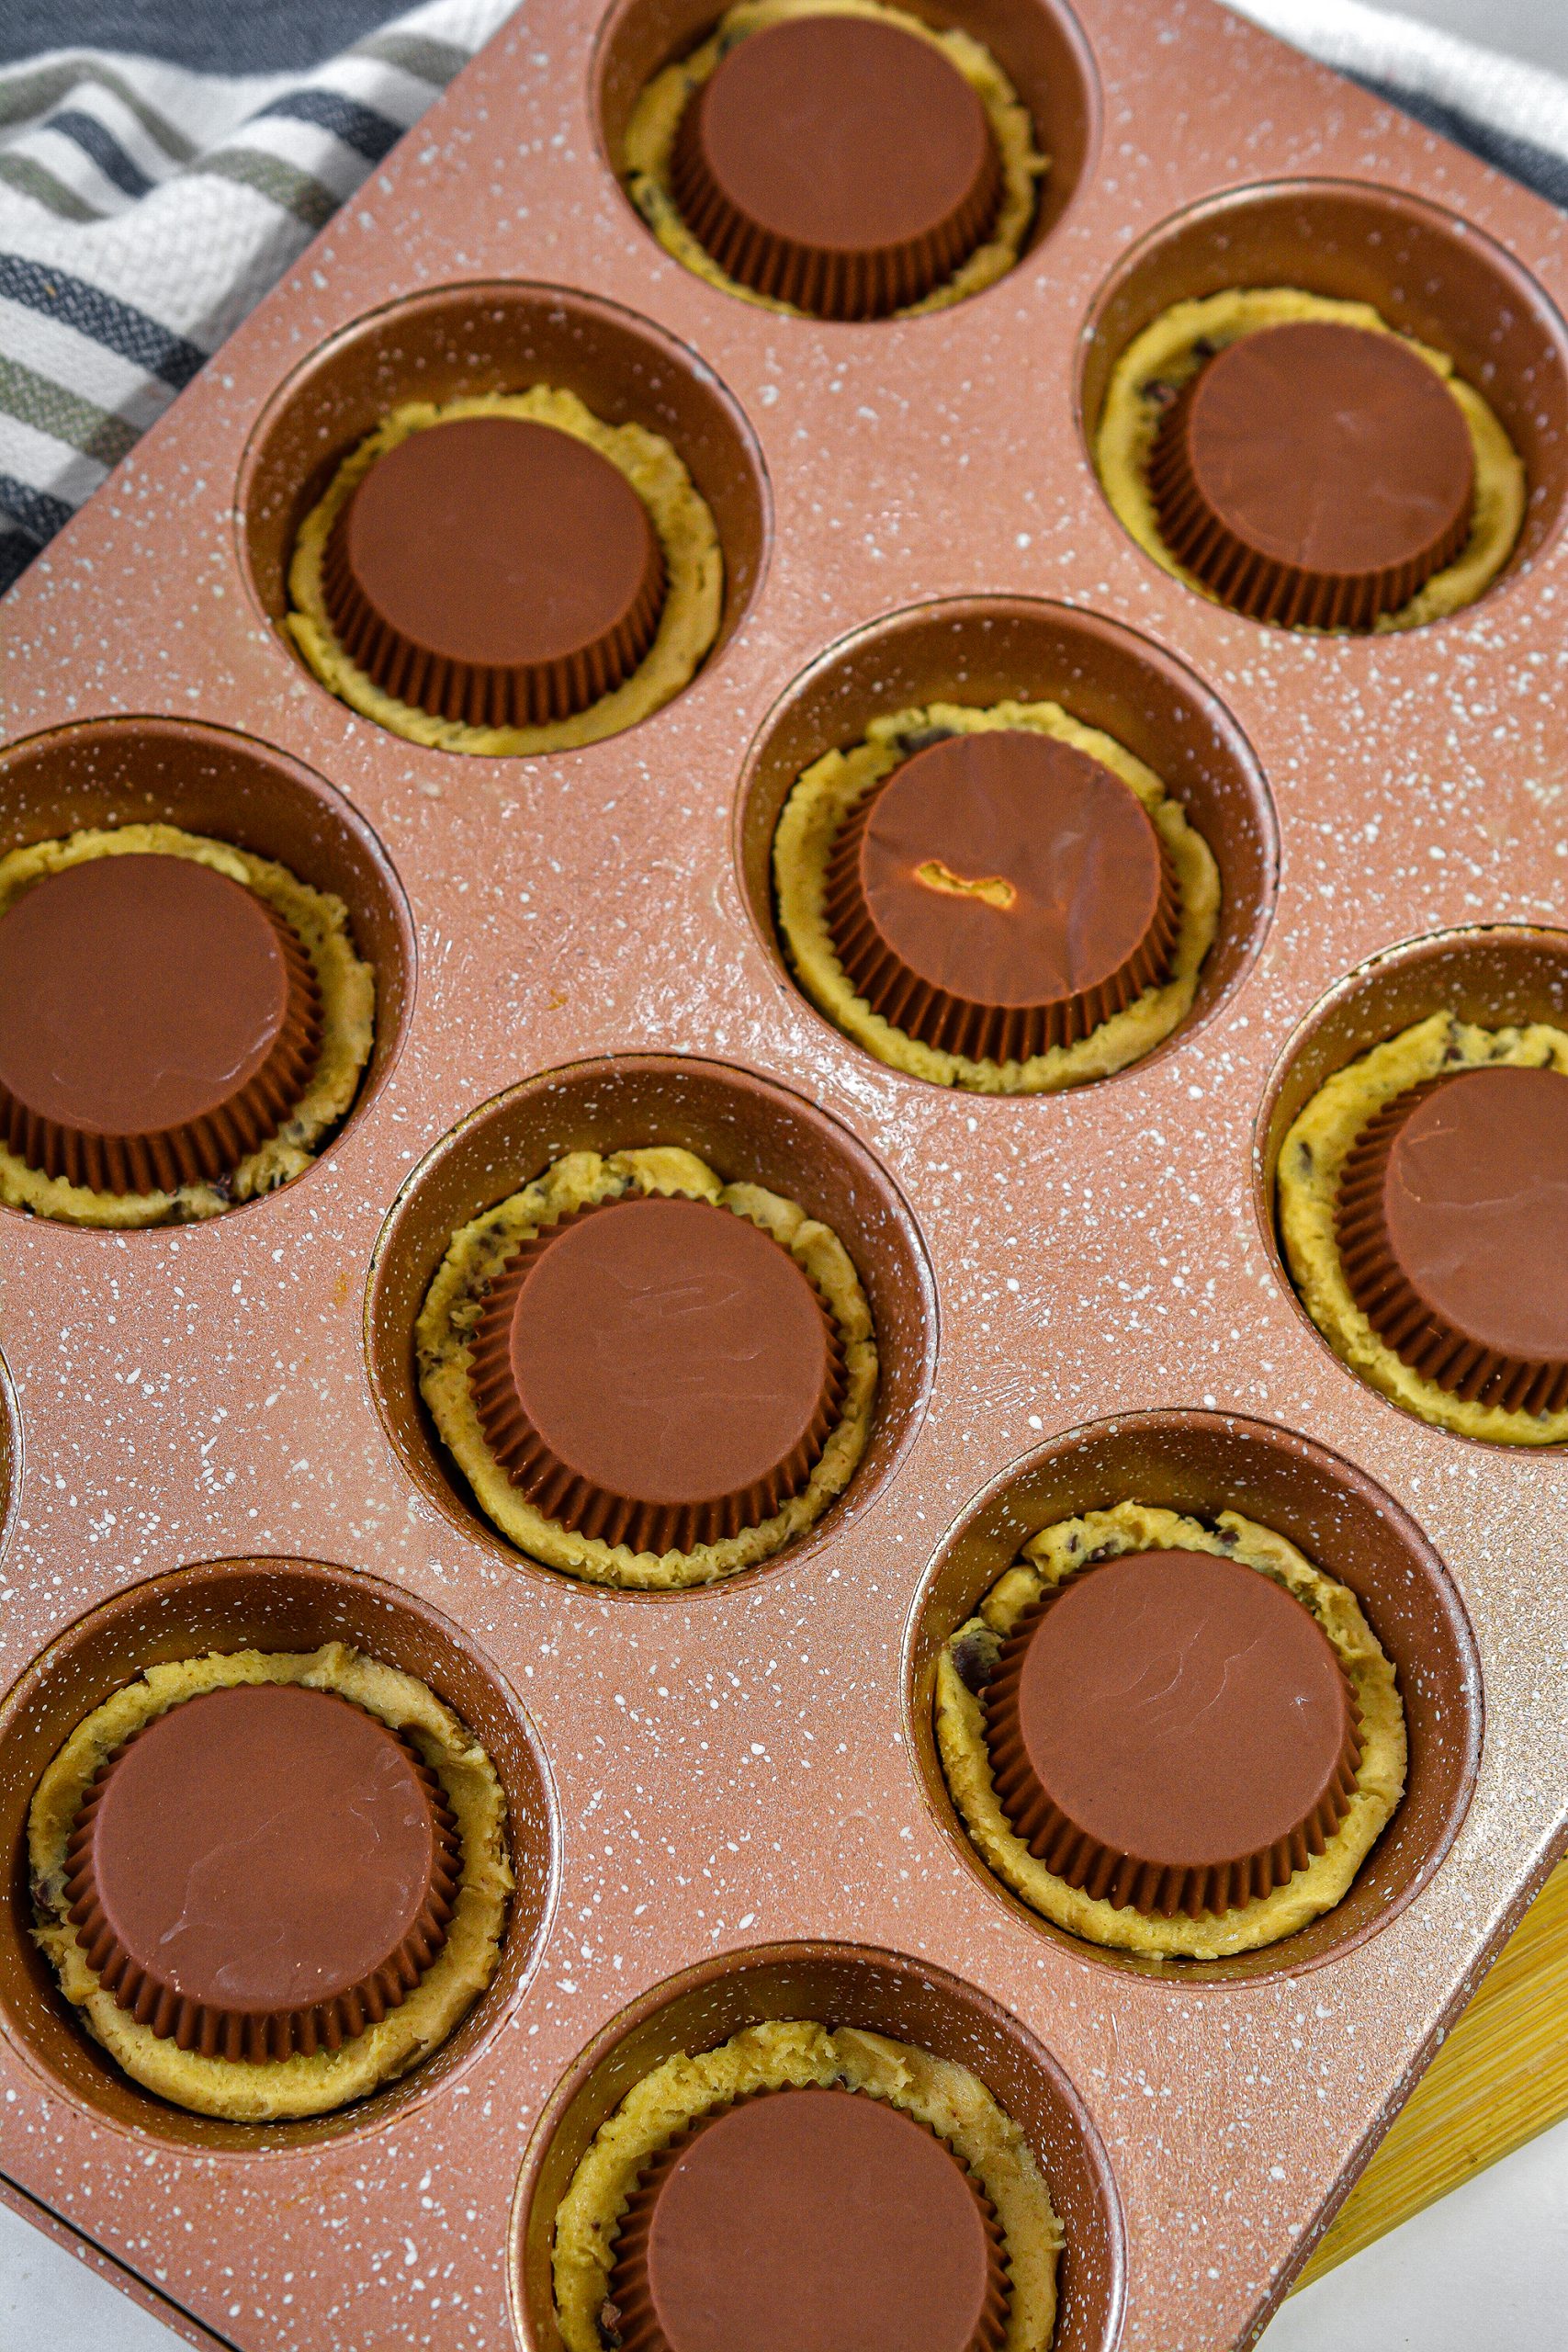 Place a Reese’s peanut butter cup upside down into each of the sections of the muffin tin.